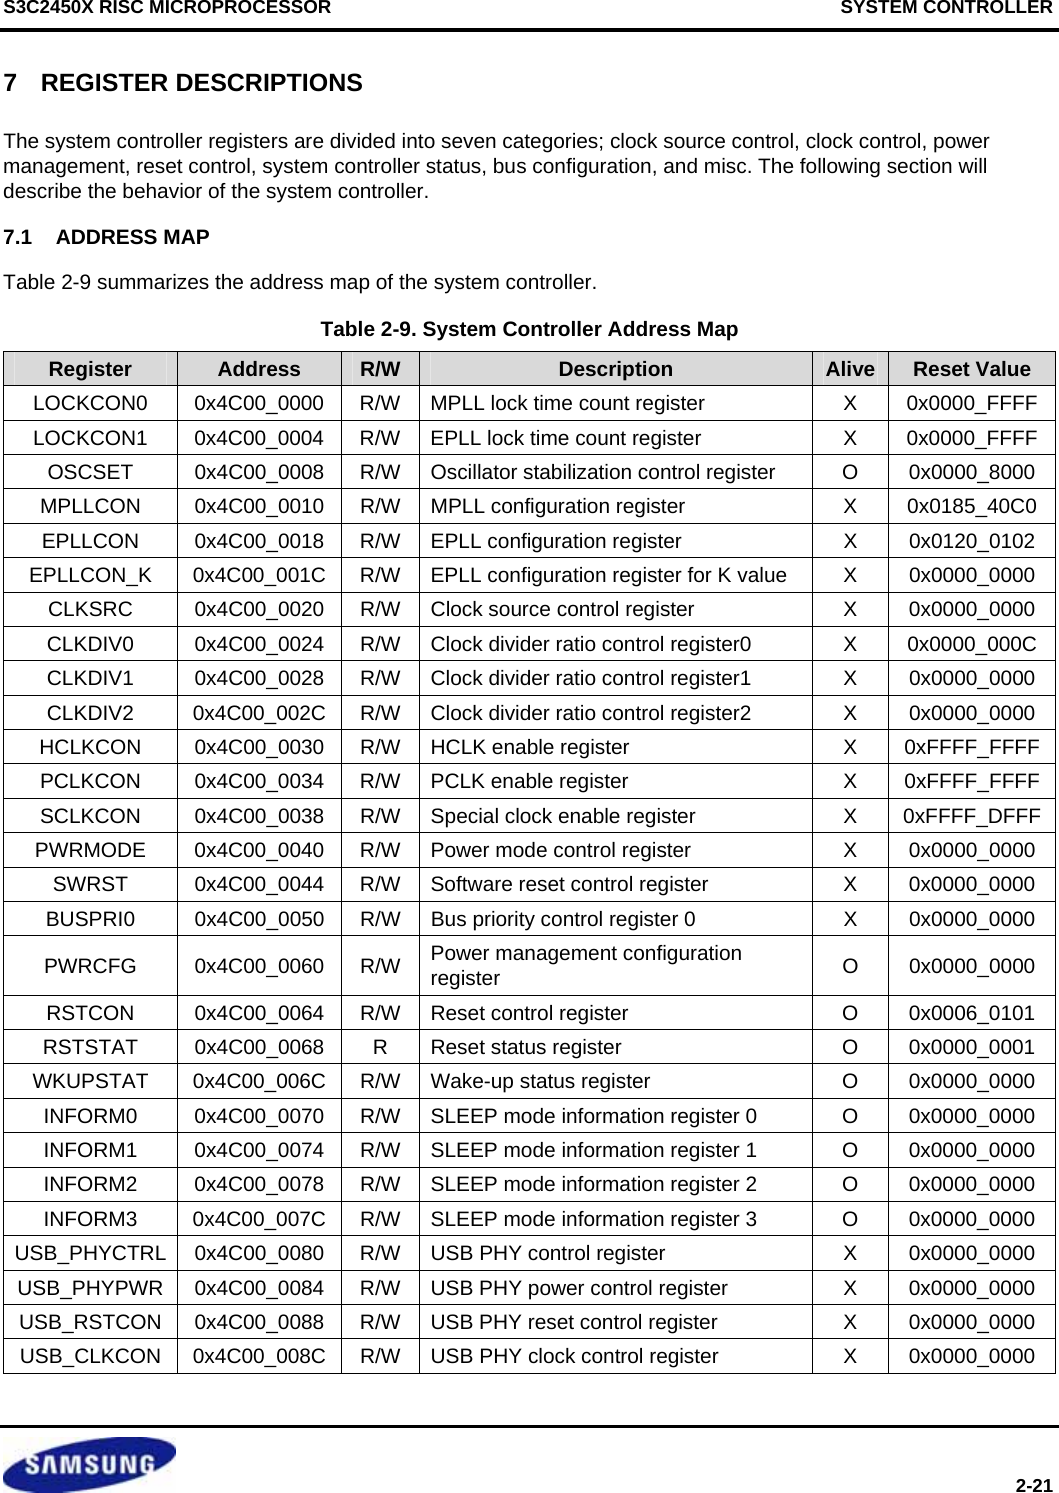 S3C2450X RISC MICROPROCESSOR   SYSTEM CONTROLLER  2-21 7  REGISTER DESCRIPTIONS The system controller registers are divided into seven categories; clock source control, clock control, power management, reset control, system controller status, bus configuration, and misc. The following section will describe the behavior of the system controller. 7.1  ADDRESS MAP Table 2-9 summarizes the address map of the system controller. Table 2-9. System Controller Address Map Register  Address  R/W  Description  Alive  Reset Value LOCKCON0  0x4C00_0000  R/W  MPLL lock time count register  X  0x0000_FFFFLOCKCON1  0x4C00_0004  R/W  EPLL lock time count register  X  0x0000_FFFFOSCSET 0x4C00_0008 R/W Oscillator stabilization control register  O  0x0000_8000 MPLLCON 0x4C00_0010 R/W MPLL configuration register  X  0x0185_40C0EPLLCON 0x4C00_0018 R/W EPLL configuration register  X  0x0120_0102 EPLLCON_K 0x4C00_001C R/W EPLL configuration register for K value  X  0x0000_0000 CLKSRC  0x4C00_0020  R/W  Clock source control register  X  0x0000_0000 CLKDIV0 0x4C00_0024 R/W Clock divider ratio control register0  X  0x0000_000CCLKDIV1 0x4C00_0028 R/W Clock divider ratio control register1  X  0x0000_0000 CLKDIV2 0x4C00_002C R/W Clock divider ratio control register2  X  0x0000_0000 HCLKCON 0x4C00_0030 R/W HCLK enable register  X  0xFFFF_FFFFPCLKCON  0x4C00_0034  R/W  PCLK enable register  X  0xFFFF_FFFFSCLKCON  0x4C00_0038  R/W  Special clock enable register  X  0xFFFF_DFFFPWRMODE  0x4C00_0040  R/W  Power mode control register  X  0x0000_0000 SWRST  0x4C00_0044  R/W  Software reset control register  X  0x0000_0000 BUSPRI0 0x4C00_0050 R/W Bus priority control register 0  X  0x0000_0000 PWRCFG 0x4C00_0060 R/W Power management configuration register  O 0x0000_0000 RSTCON 0x4C00_0064 R/W Reset control register  O  0x0006_0101 RSTSTAT 0x4C00_0068 R Reset status register  O  0x0000_0001 WKUPSTAT 0x4C00_006C R/W Wake-up status register  O  0x0000_0000 INFORM0  0x4C00_0070  R/W  SLEEP mode information register 0  O  0x0000_0000 INFORM1  0x4C00_0074  R/W  SLEEP mode information register 1  O  0x0000_0000 INFORM2  0x4C00_0078  R/W  SLEEP mode information register 2  O  0x0000_0000 INFORM3  0x4C00_007C  R/W  SLEEP mode information register 3  O  0x0000_0000 USB_PHYCTRL  0x4C00_0080  R/W  USB PHY control register  X  0x0000_0000 USB_PHYPWR  0x4C00_0084  R/W  USB PHY power control register  X  0x0000_0000 USB_RSTCON  0x4C00_0088  R/W  USB PHY reset control register  X  0x0000_0000 USB_CLKCON  0x4C00_008C  R/W  USB PHY clock control register  X  0x0000_0000 